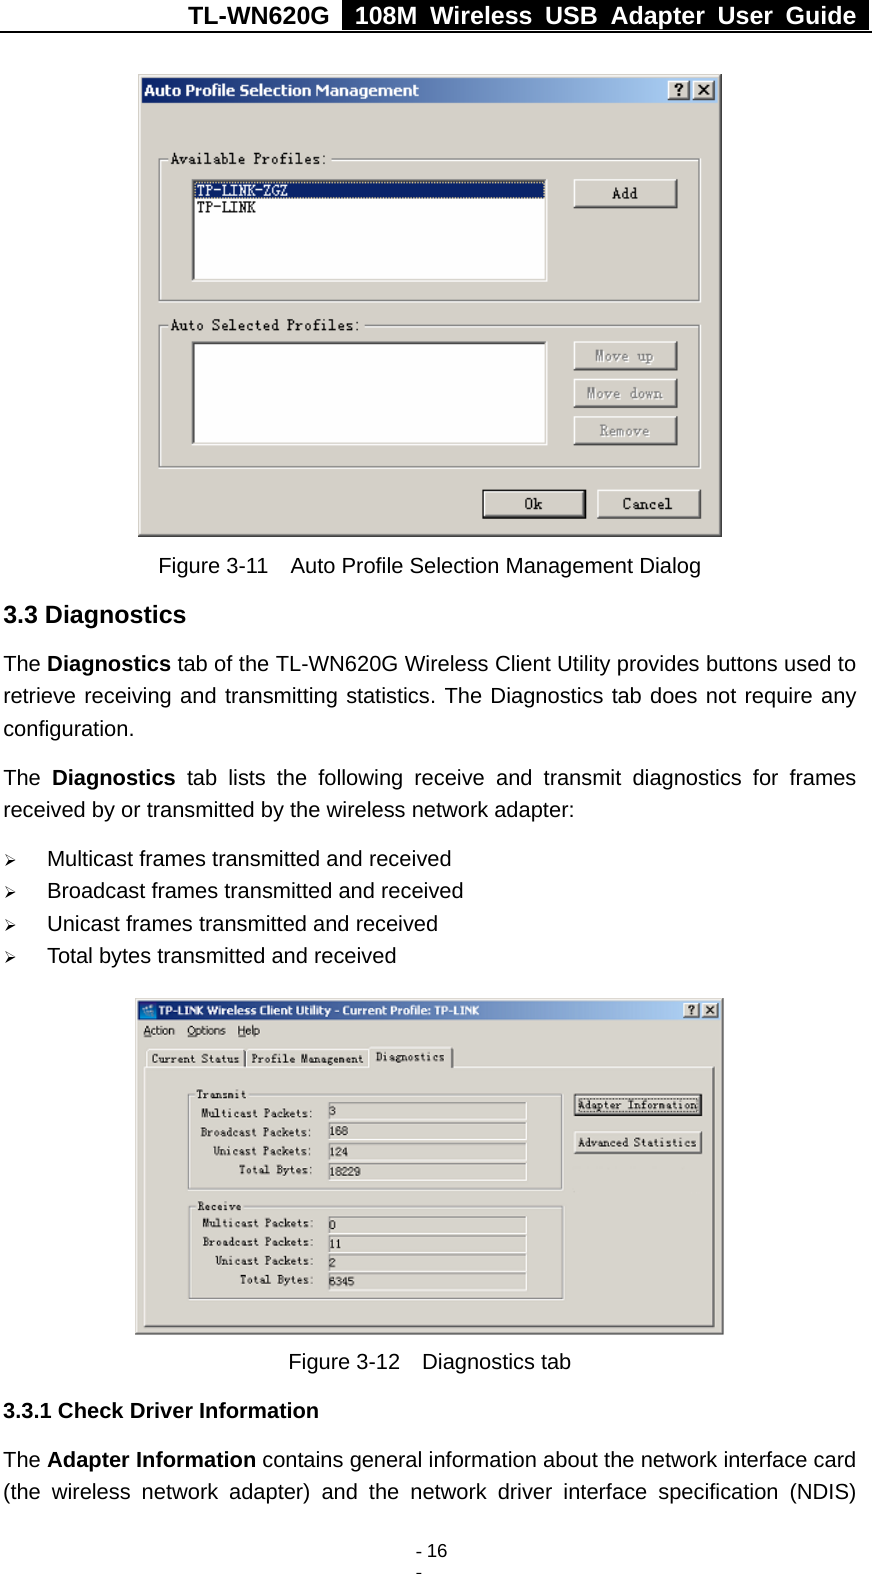 TL-WN620G   108M Wireless USB Adapter User Guide    - 16 -  Figure 3-11    Auto Profile Selection Management Dialog 3.3 Diagnostics The Diagnostics tab of the TL-WN620G Wireless Client Utility provides buttons used to retrieve receiving and transmitting statistics. The Diagnostics tab does not require any configuration.   The  Diagnostics tab lists the following receive and transmit diagnostics for frames received by or transmitted by the wireless network adapter: ¾ Multicast frames transmitted and received   ¾ Broadcast frames transmitted and received   ¾ Unicast frames transmitted and received   ¾ Total bytes transmitted and received  Figure 3-12  Diagnostics tab 3.3.1 Check Driver Information The Adapter Information contains general information about the network interface card (the wireless network adapter) and the network driver interface specification (NDIS) 